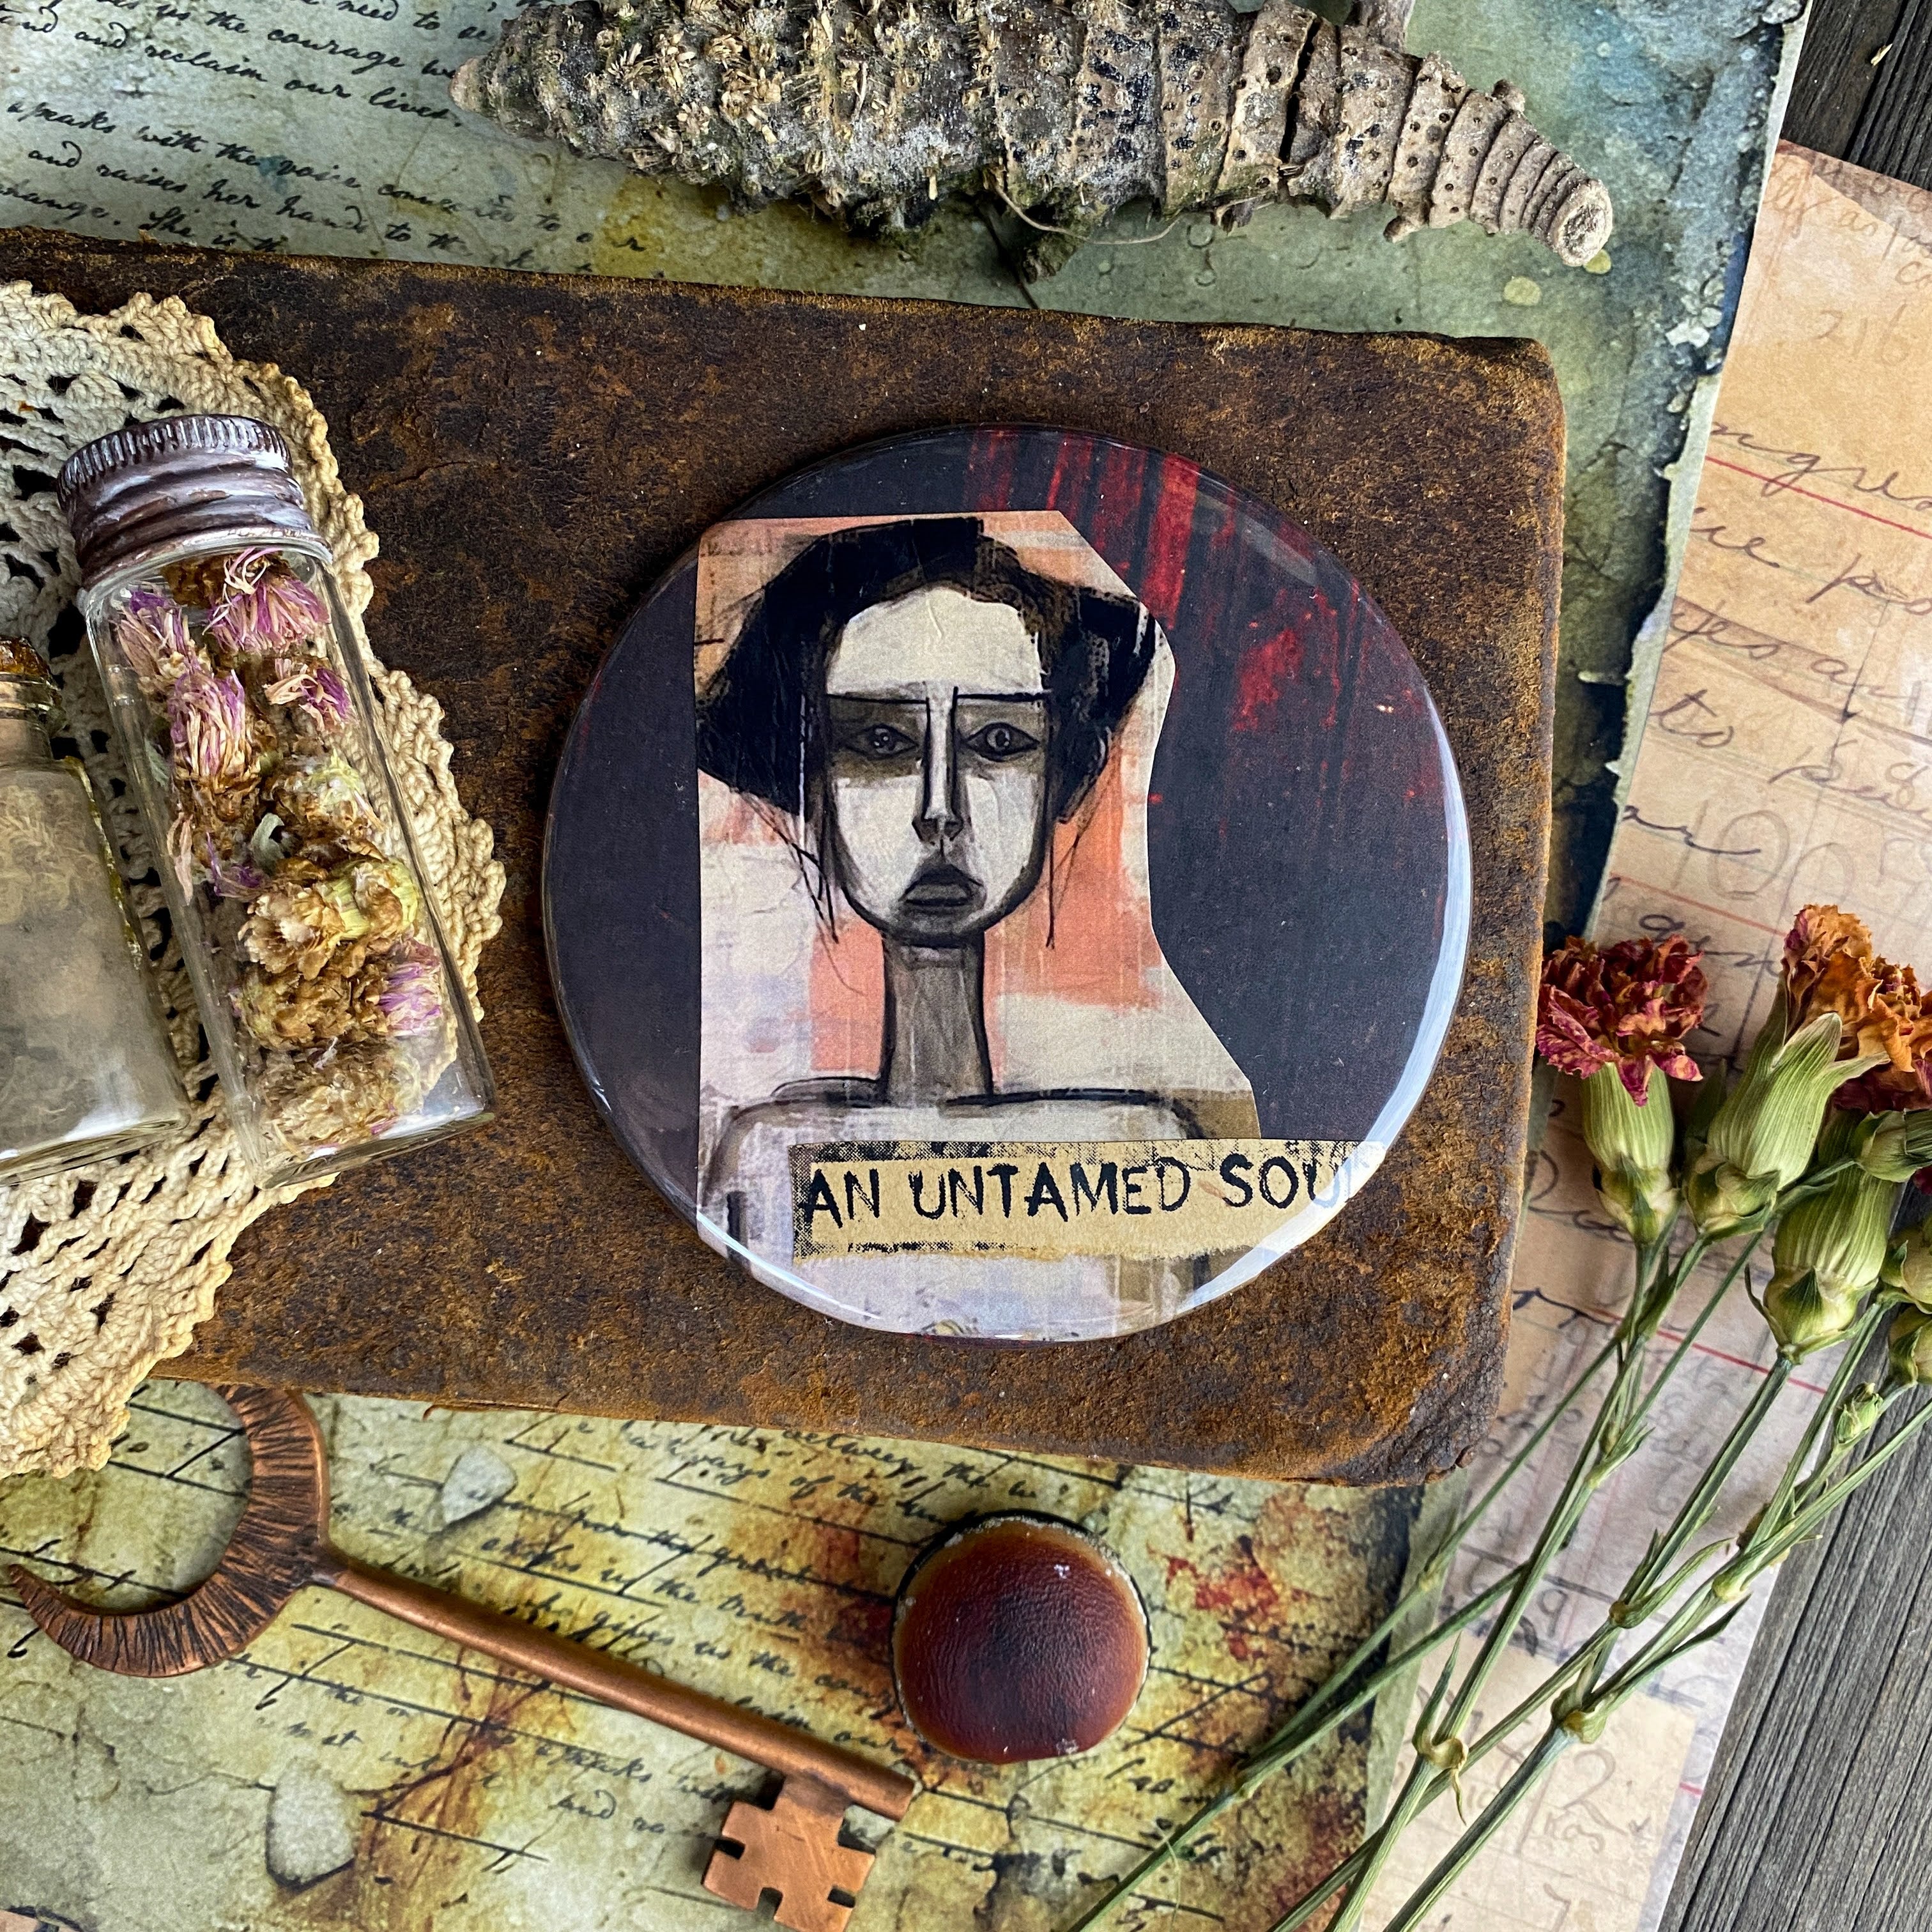 AN UNTAMED SOUL - Hand Pressed Pocket Mirror with Original Collage Art